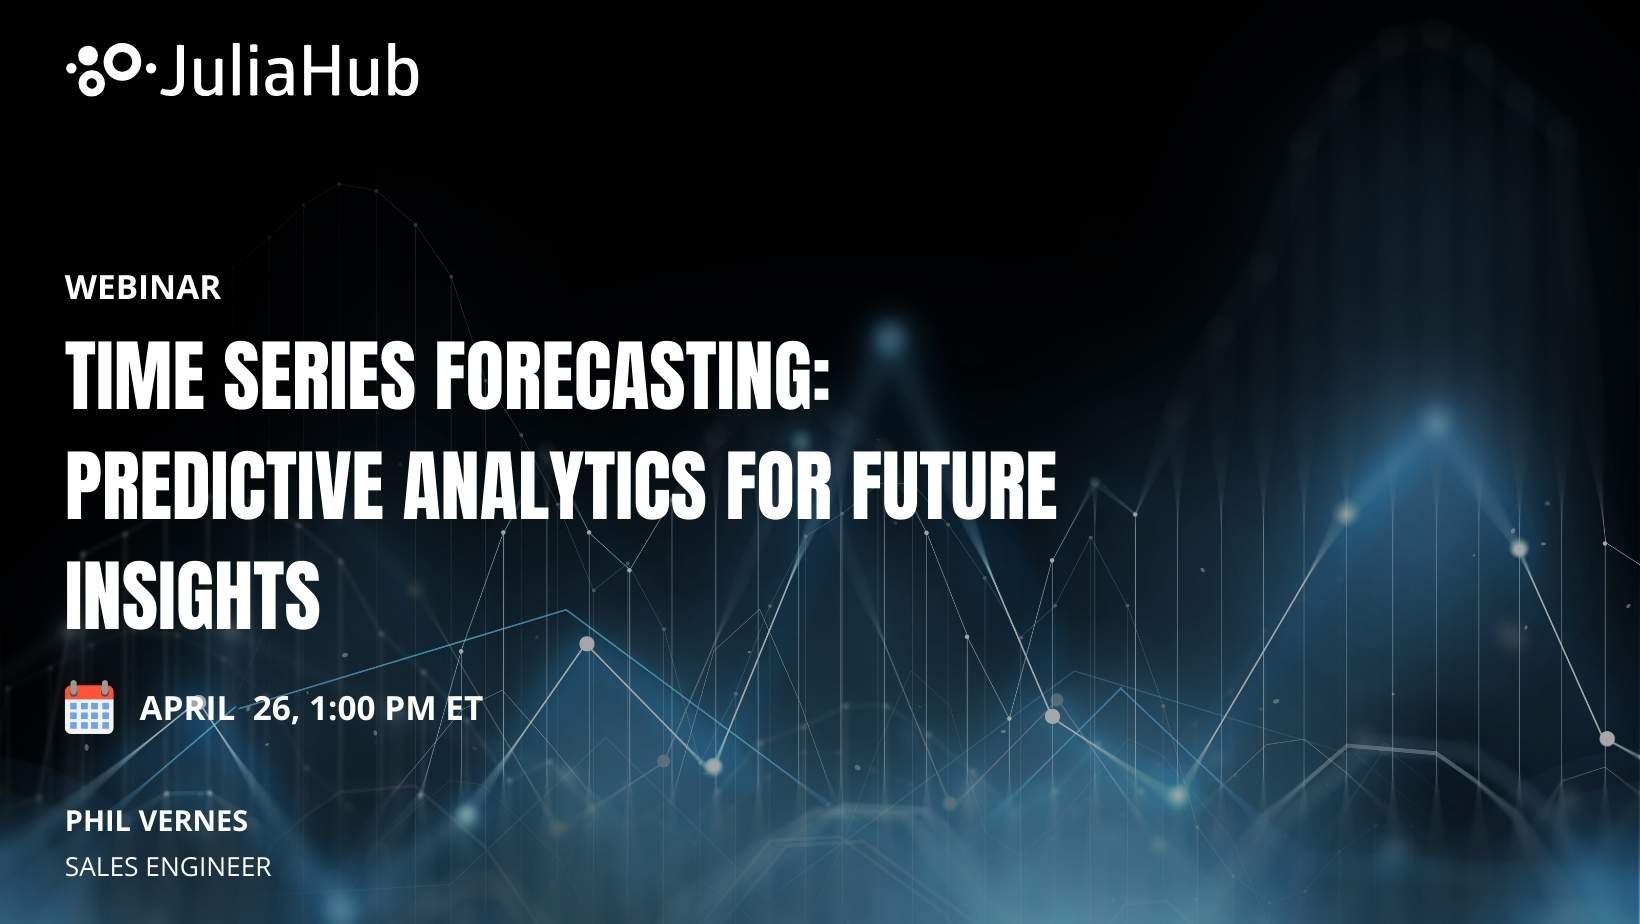 Time Series Forecasting: Predictive Analytics for Future Insights | JuliaHub